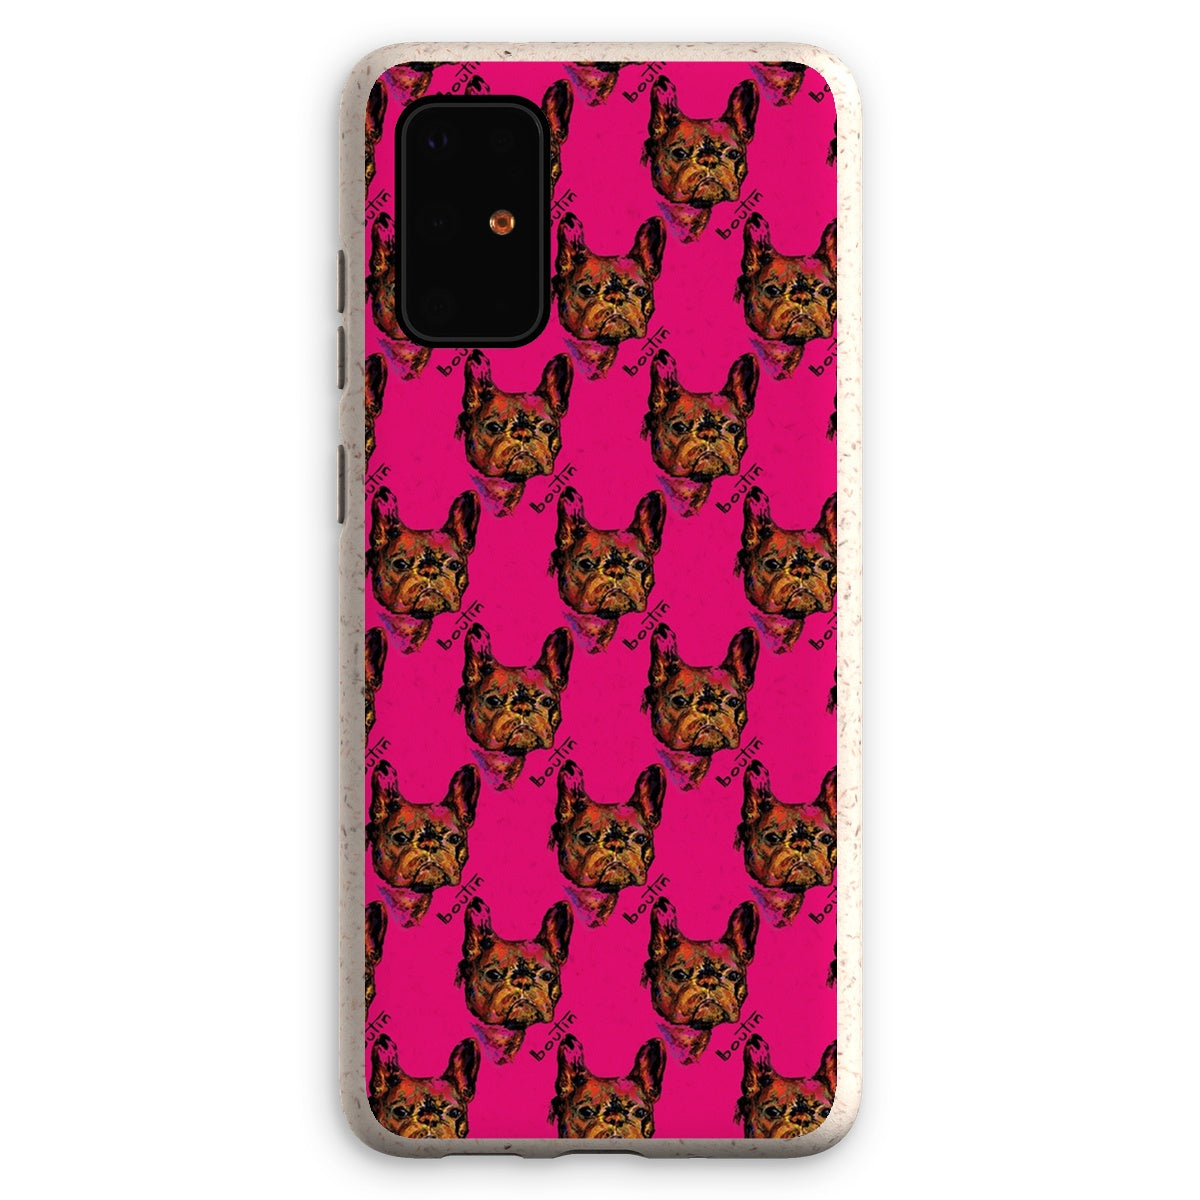 King George Magenta Eco Friendly Cell Case